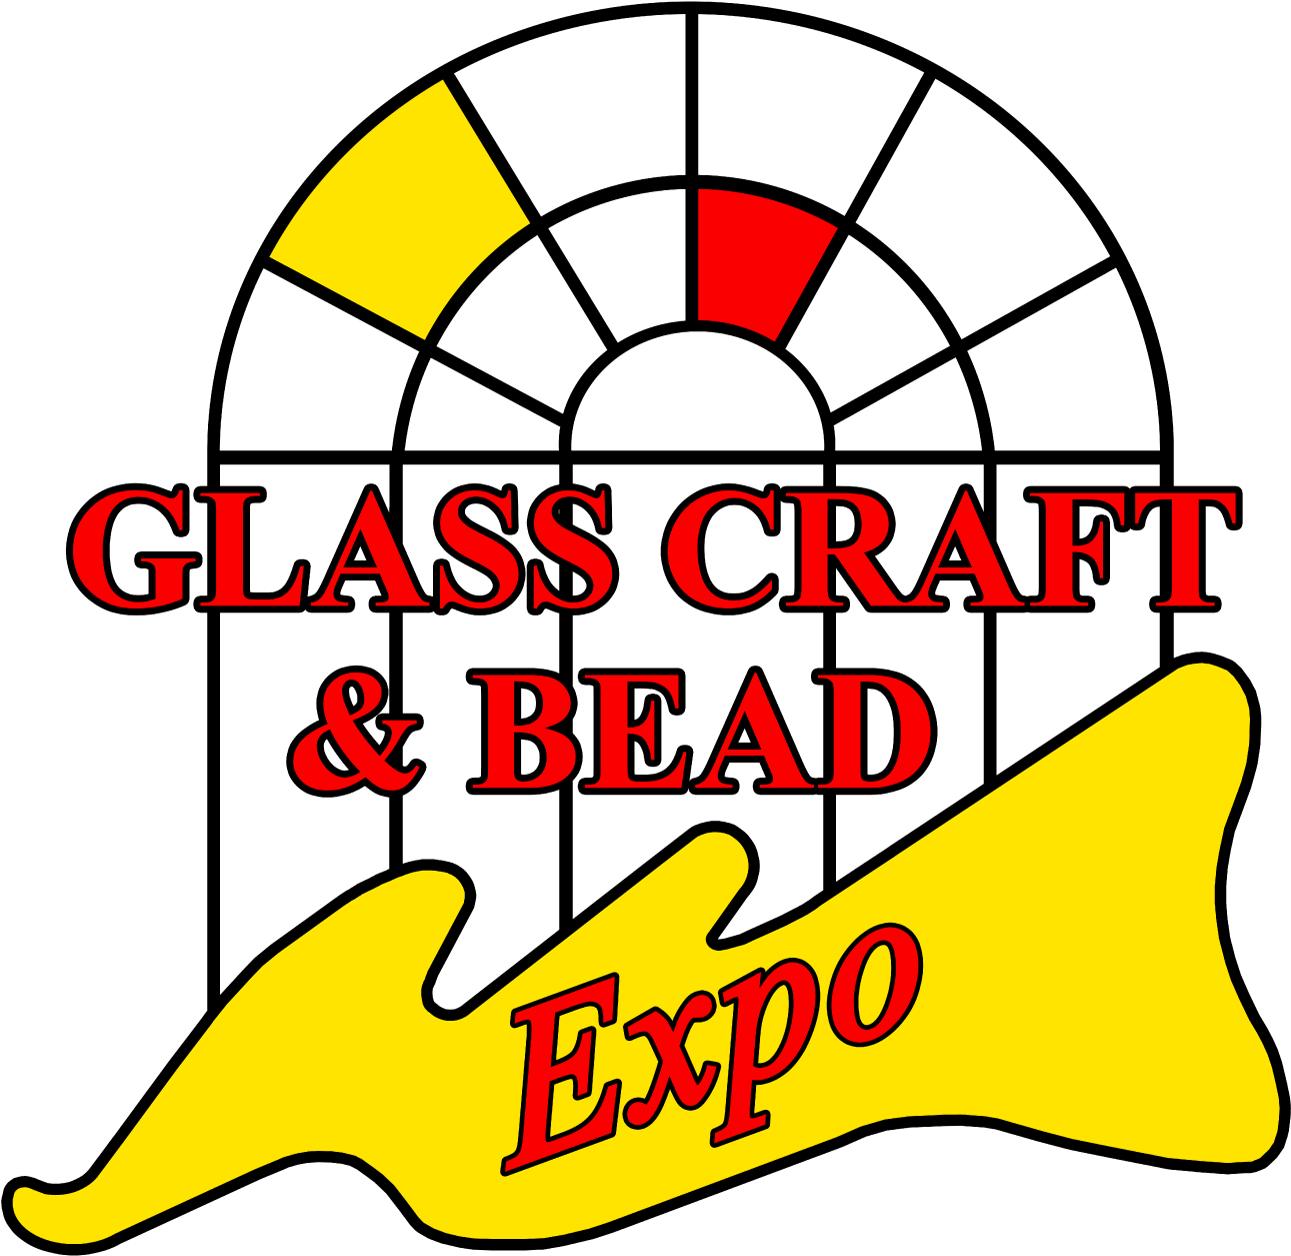 Come See Delphi Glass At The 2017 Glass Craft & Bead - Glass Craft And Bead Expo (1300x1276)